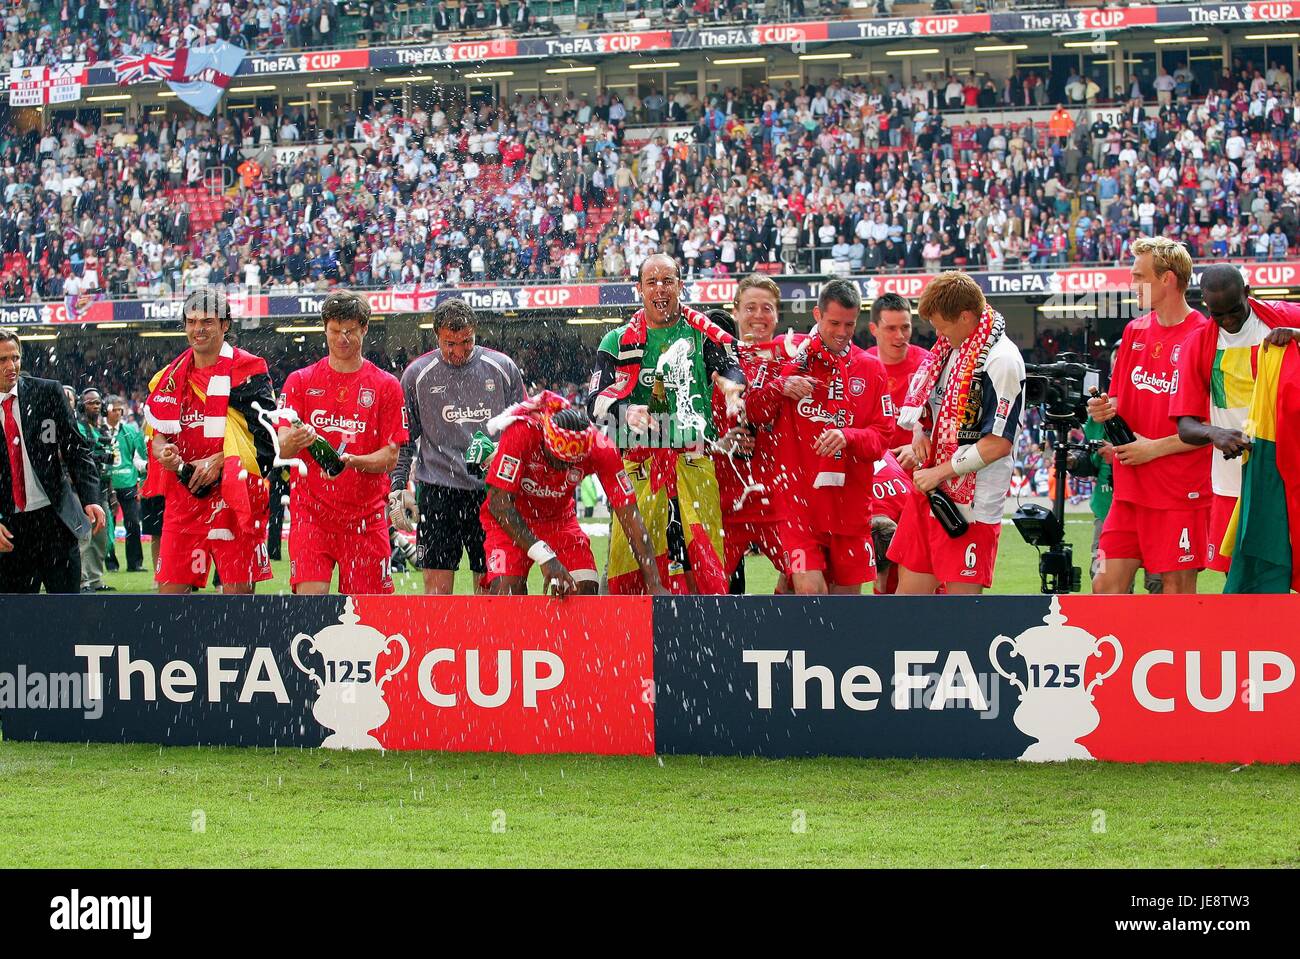 LIVERPOOL FC THE FA CUP FINAL MILLENNIUM STADIUM CARDIFF WALES 13 May 2006 Stock Photo